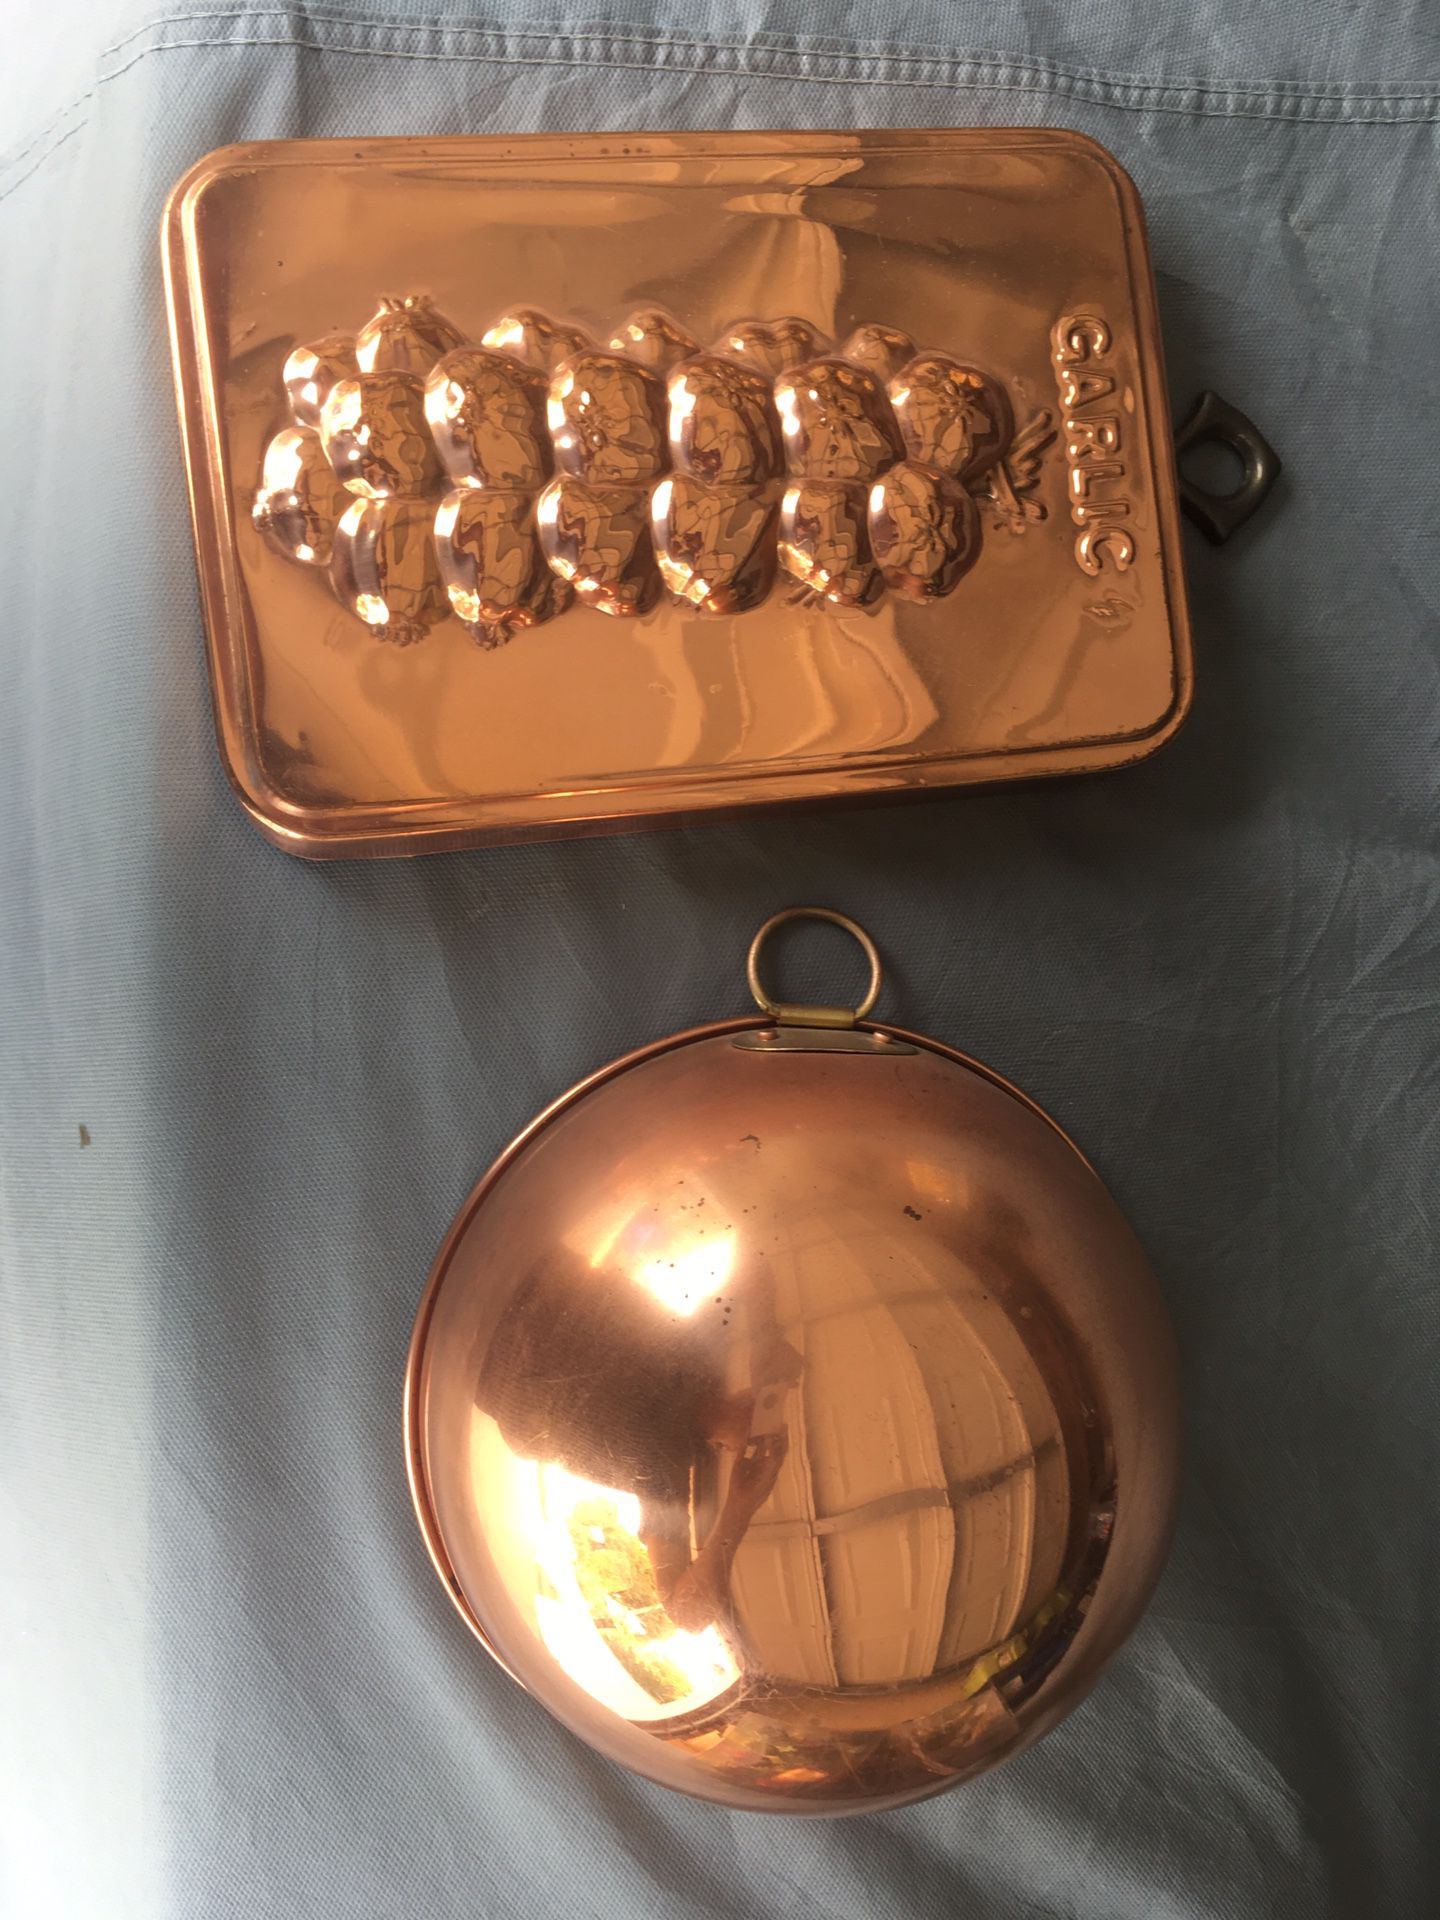 Copper bowl and copper plated garlic mold pan